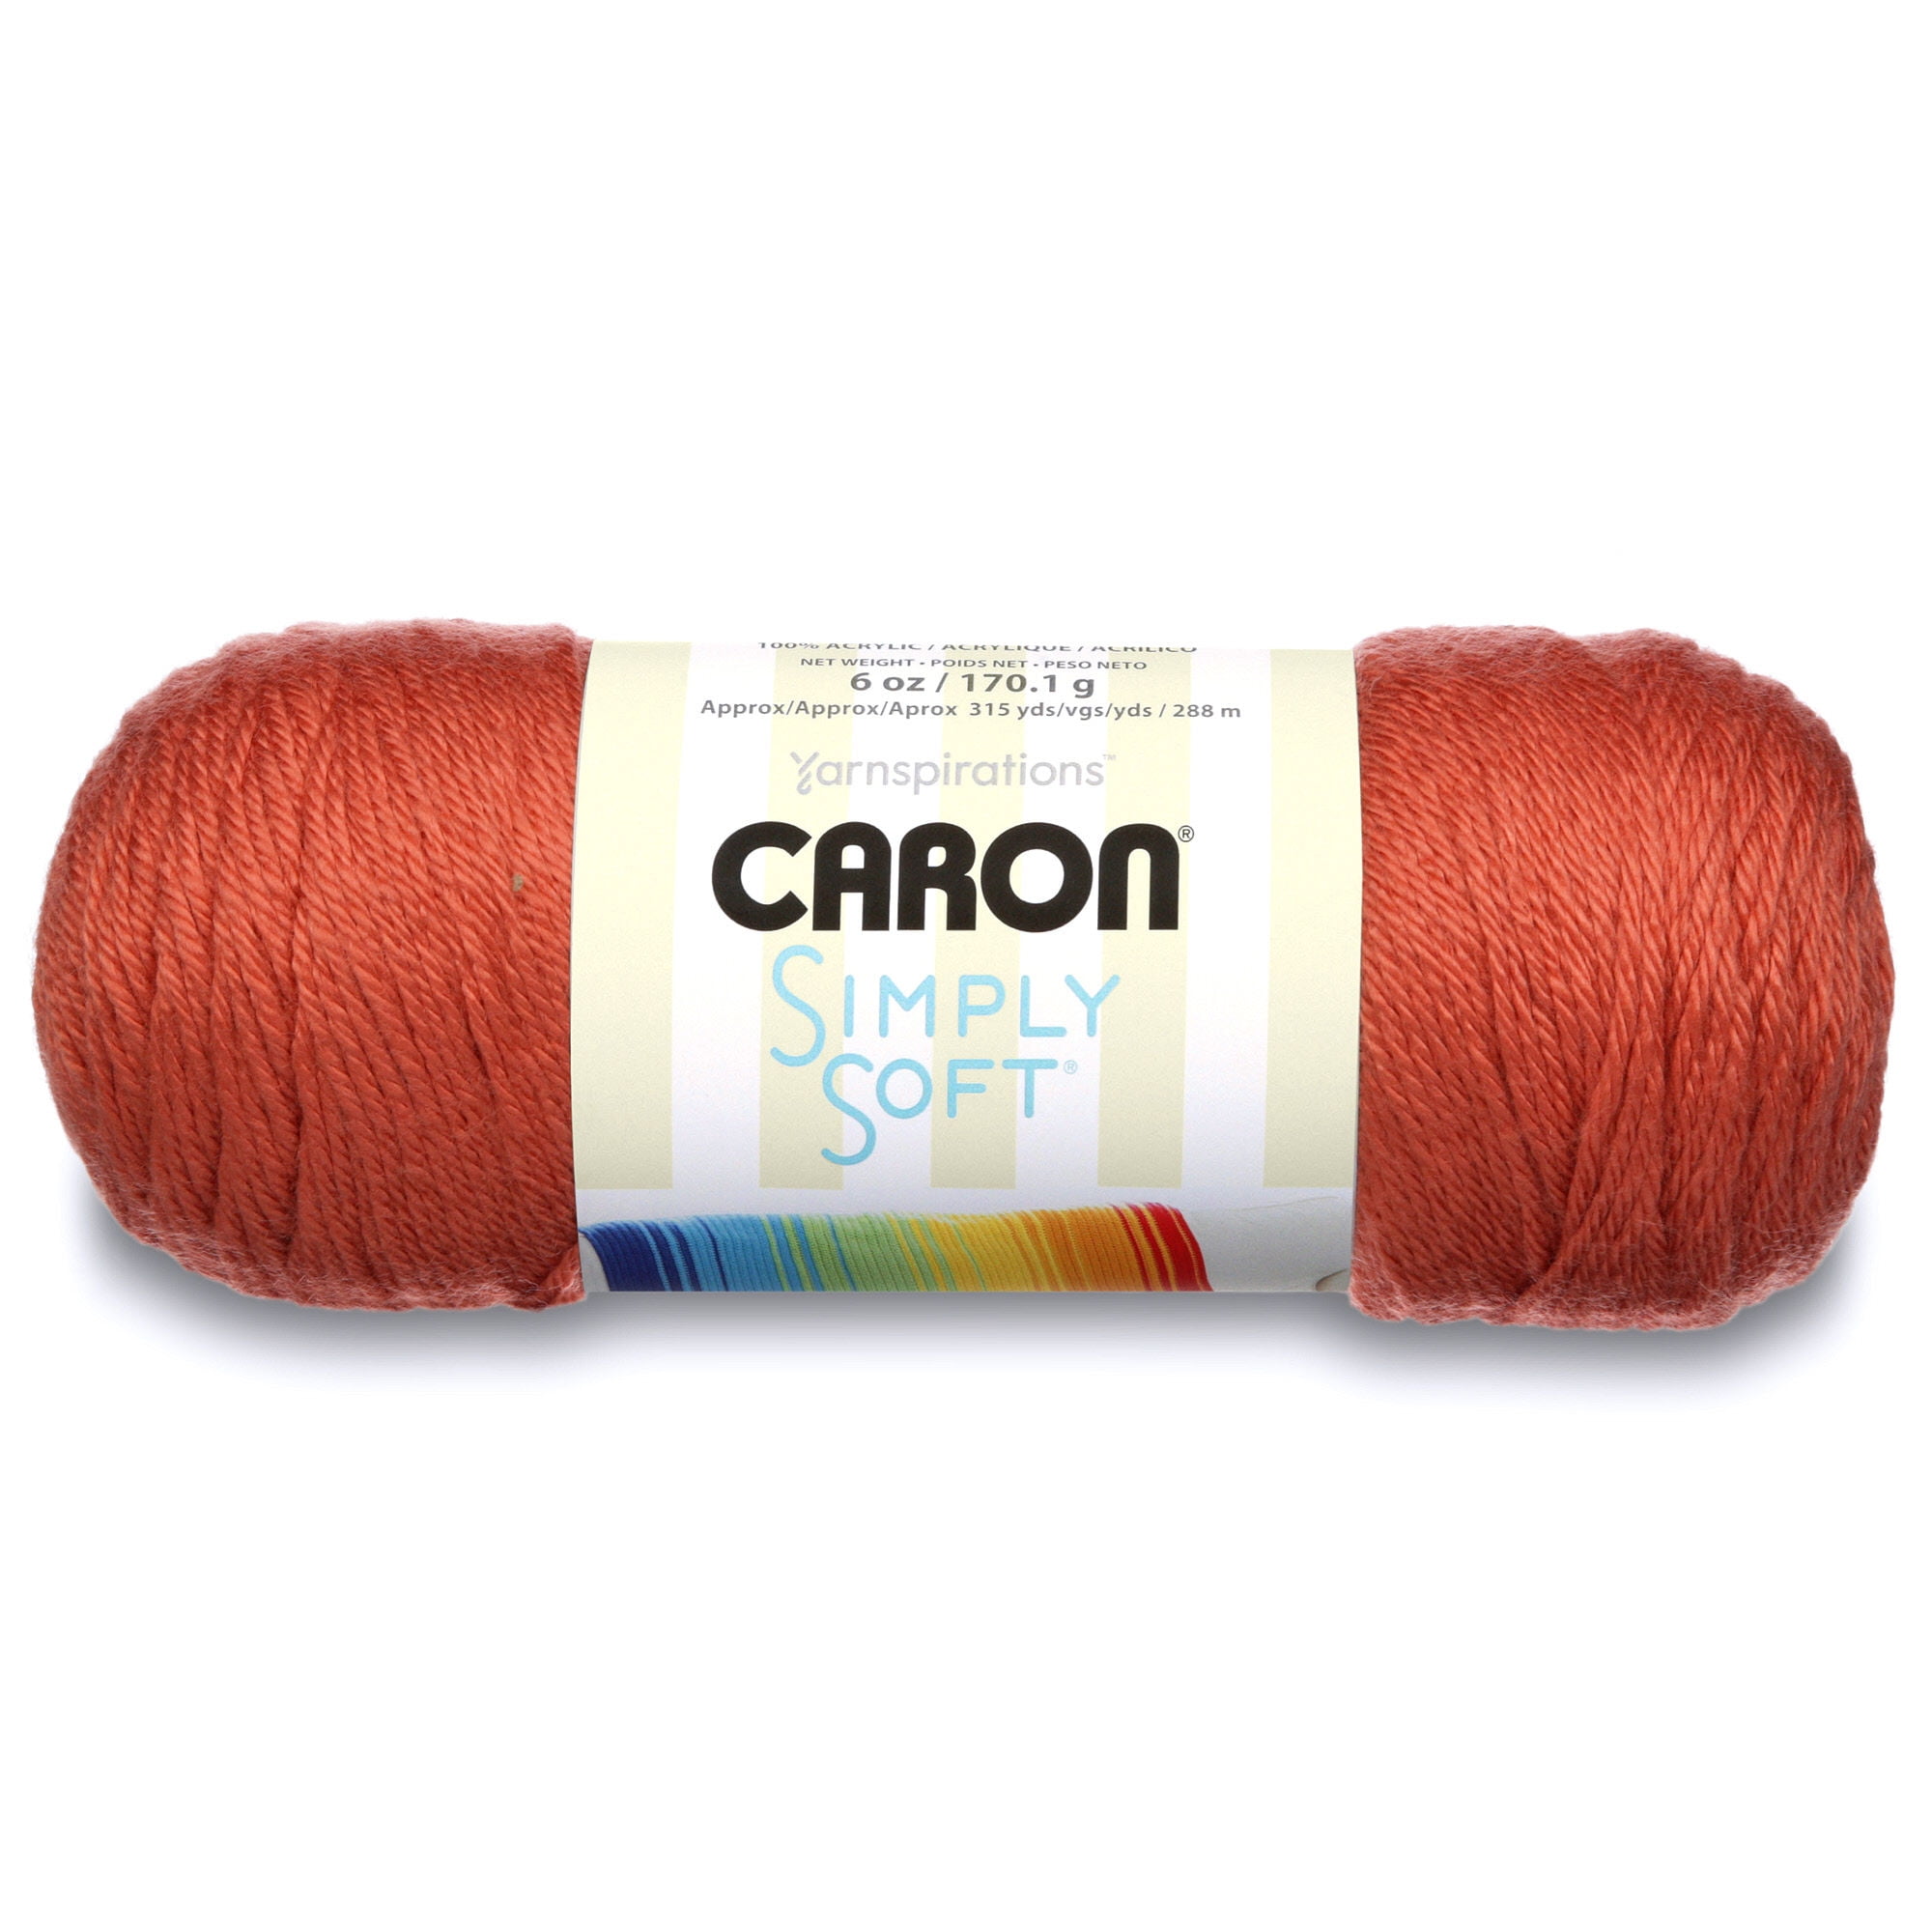 Caron Simply Soft Solids Yarn-Persimmon, 1 count - Pay Less Super Markets